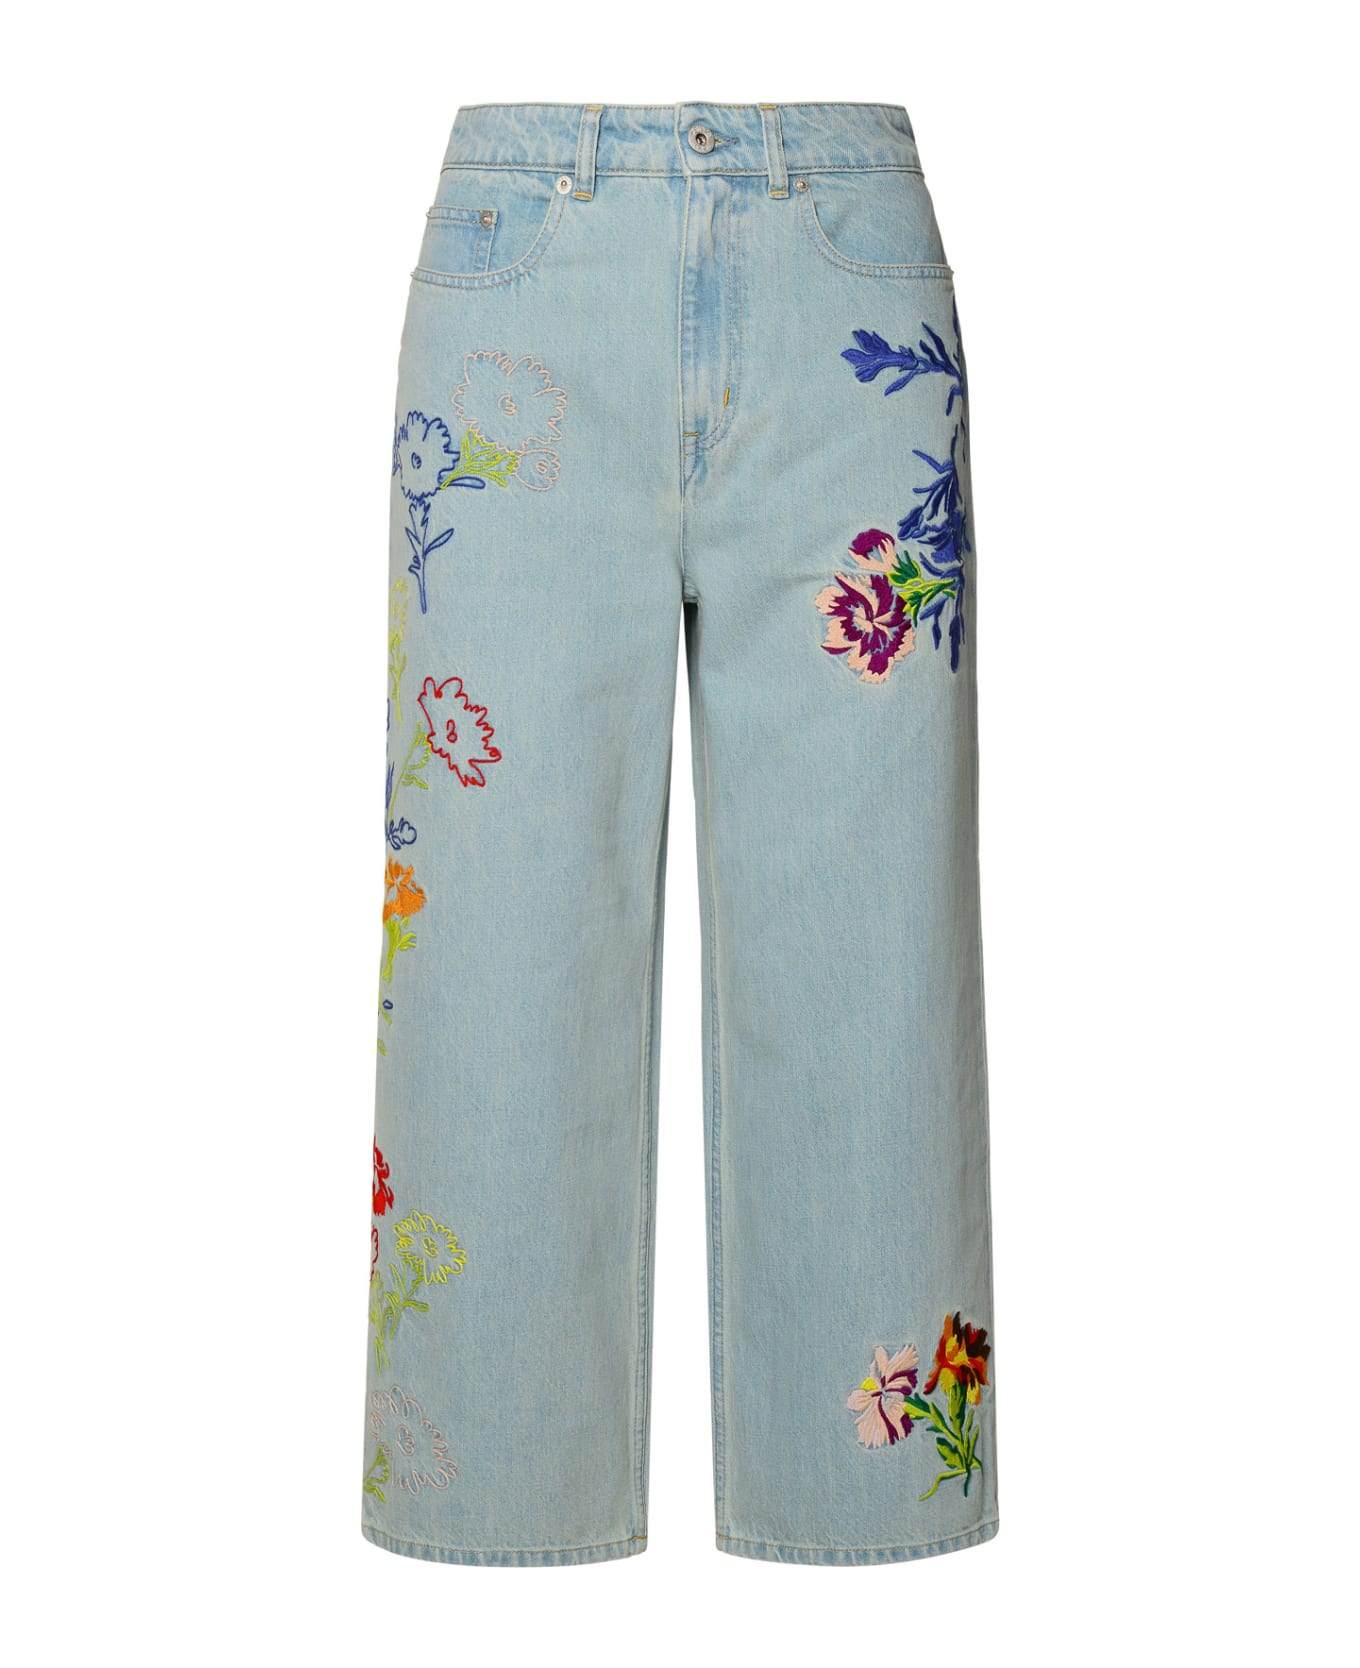 Kenzo Flower Jeans - STONE BLEACHED デニム